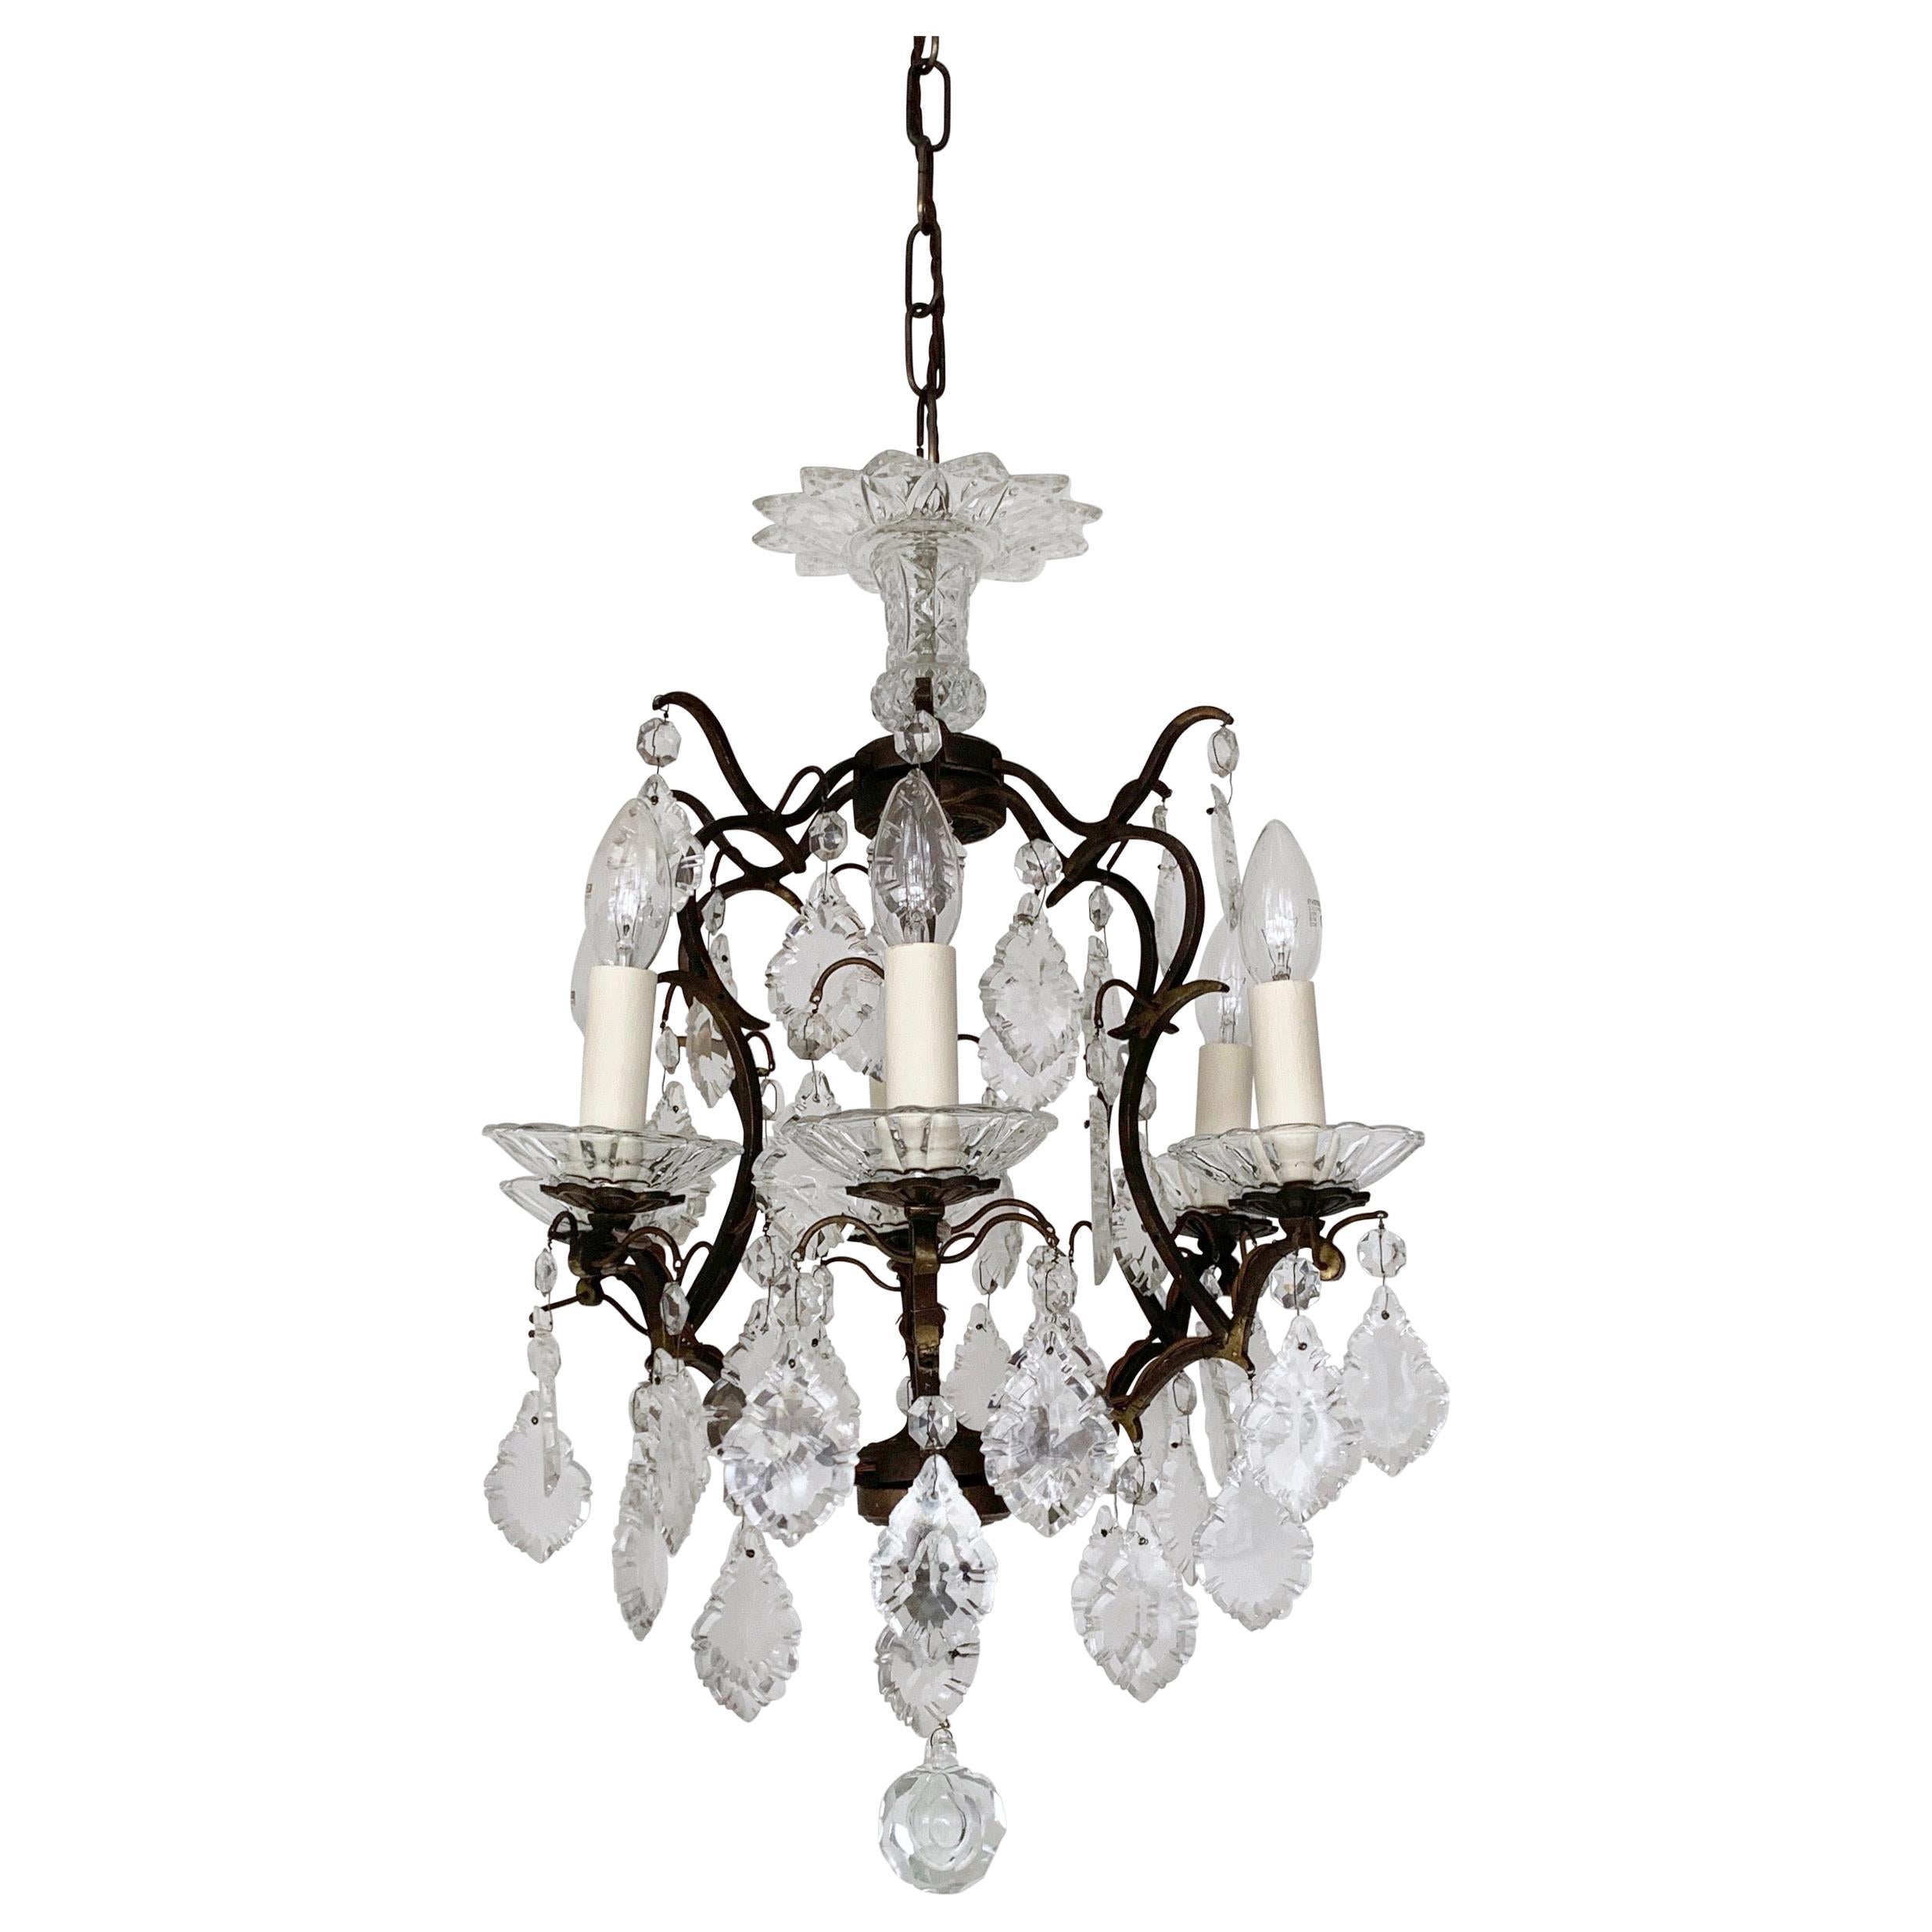 Italian Birdcage Chandelier with Glass Details For Sale